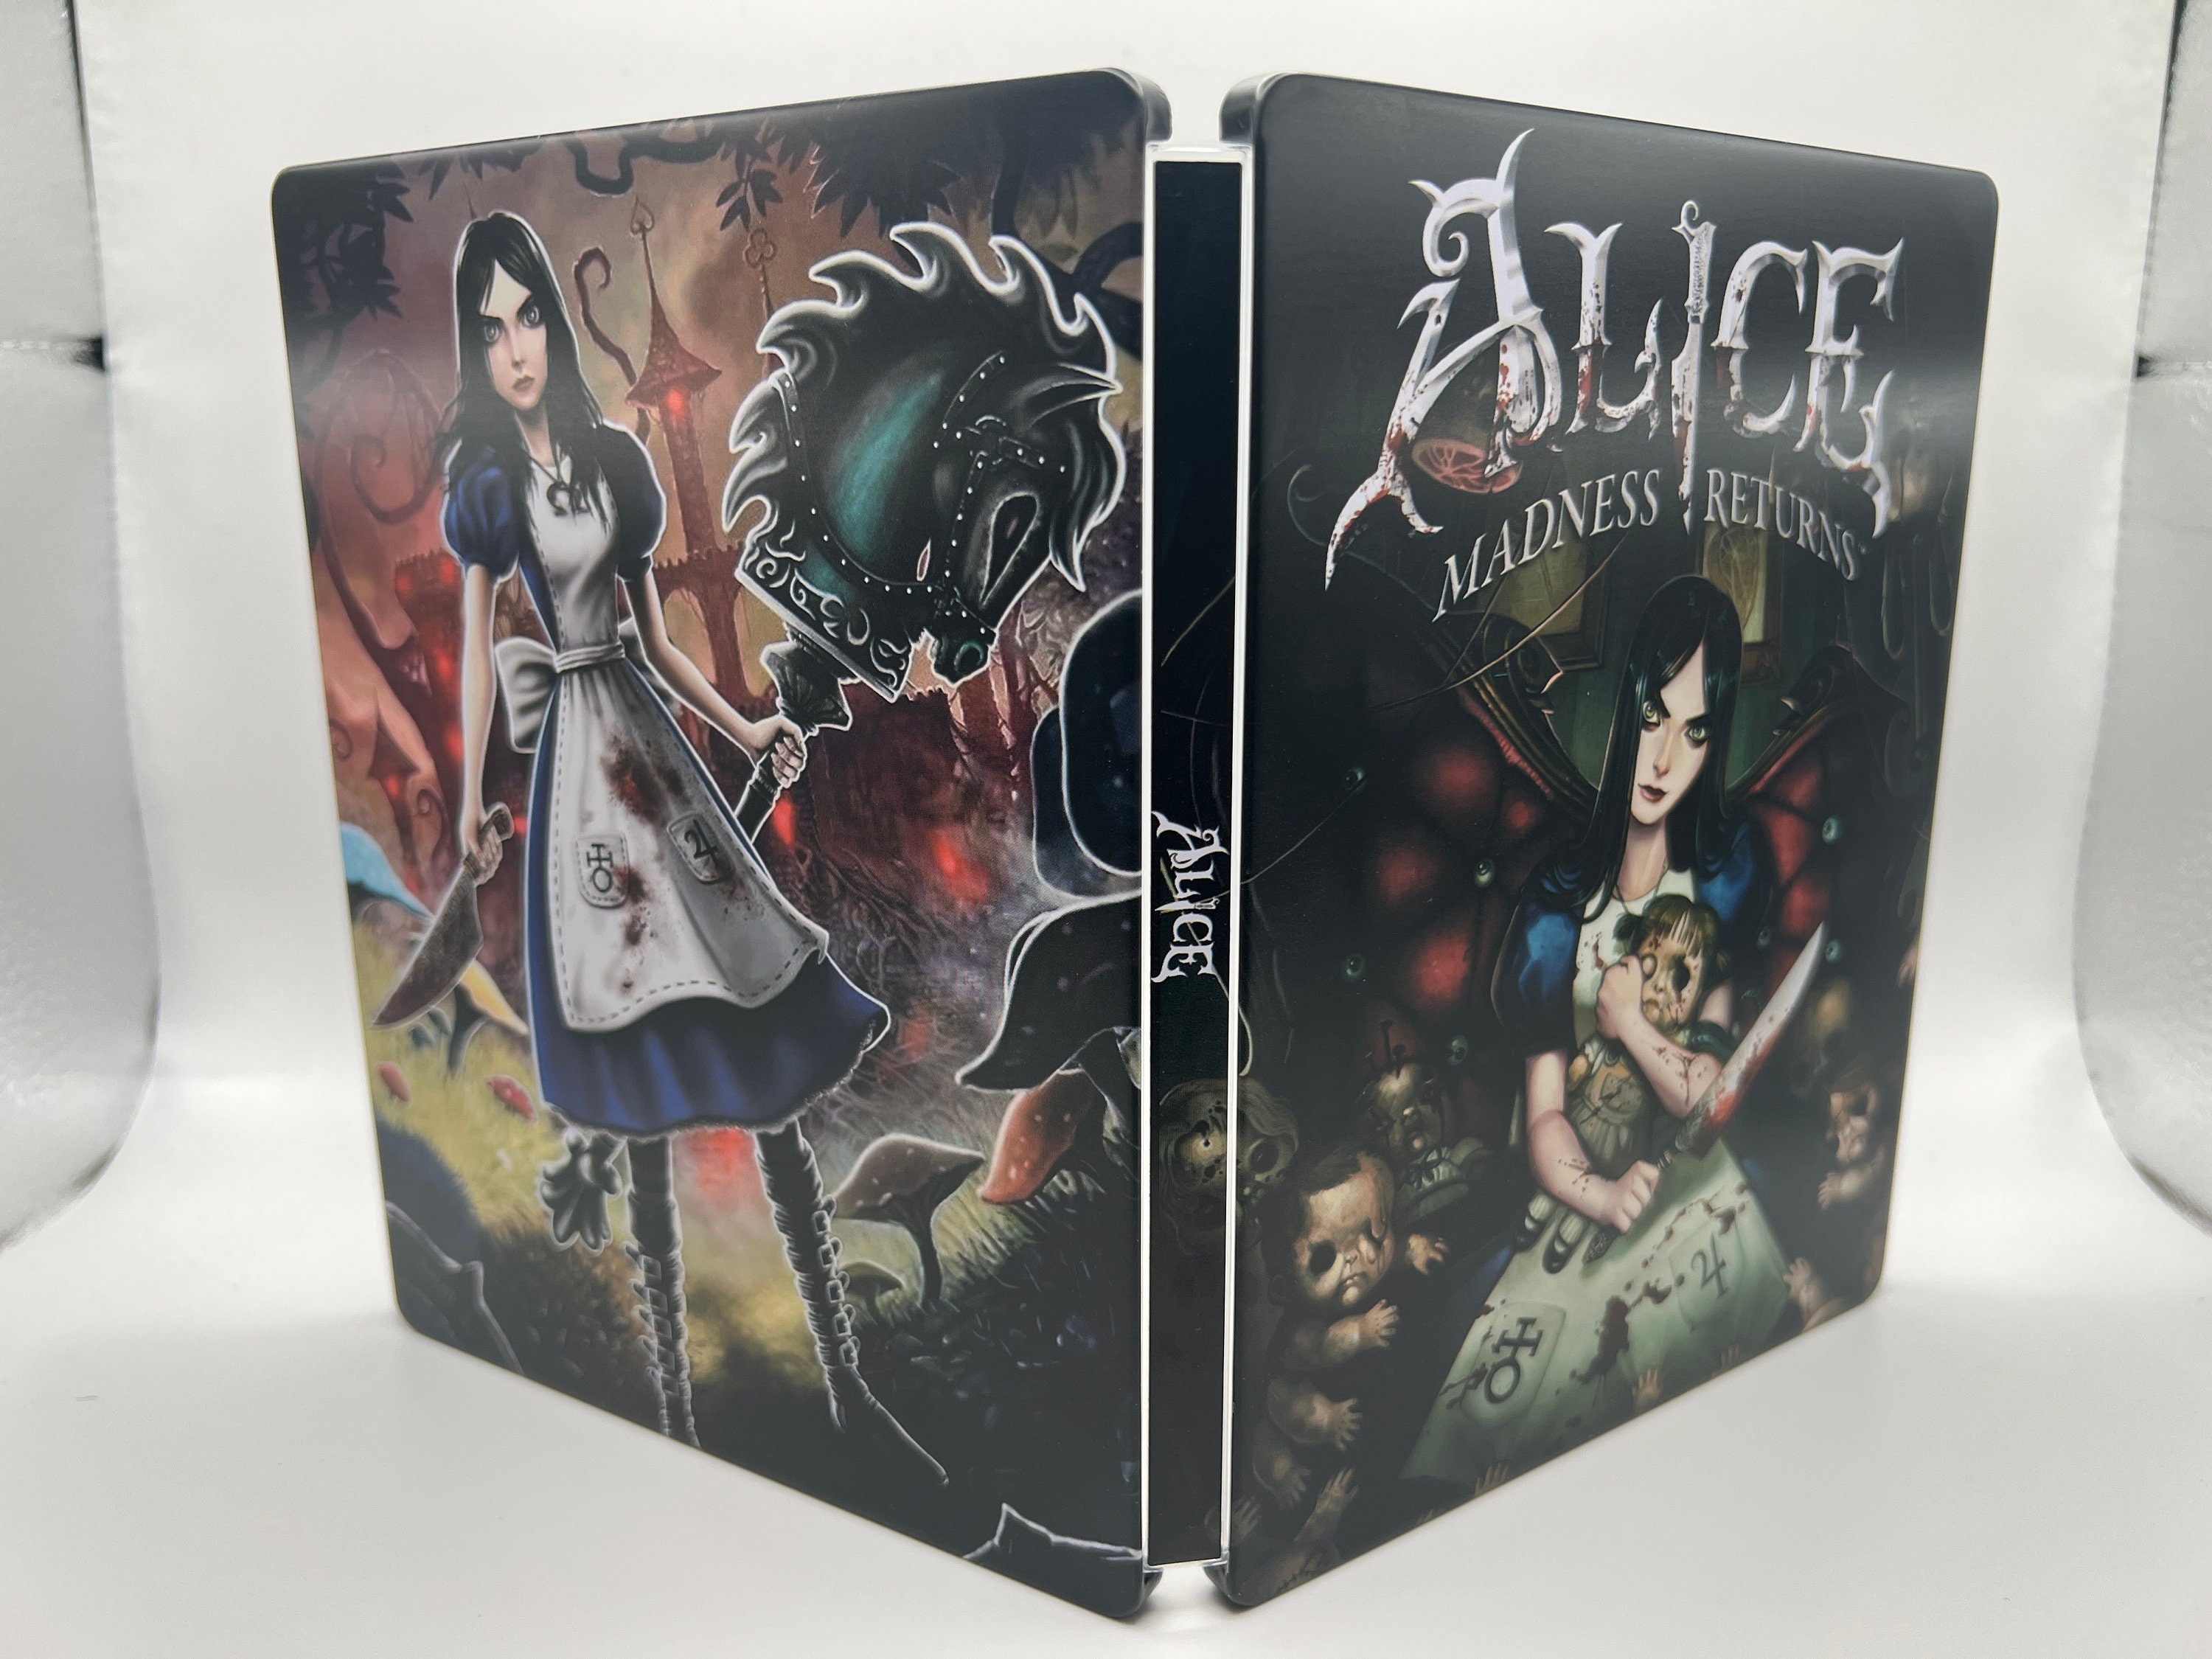 ALICE MADNESS RETURNS XBOX 360 - Have you played a classic today?